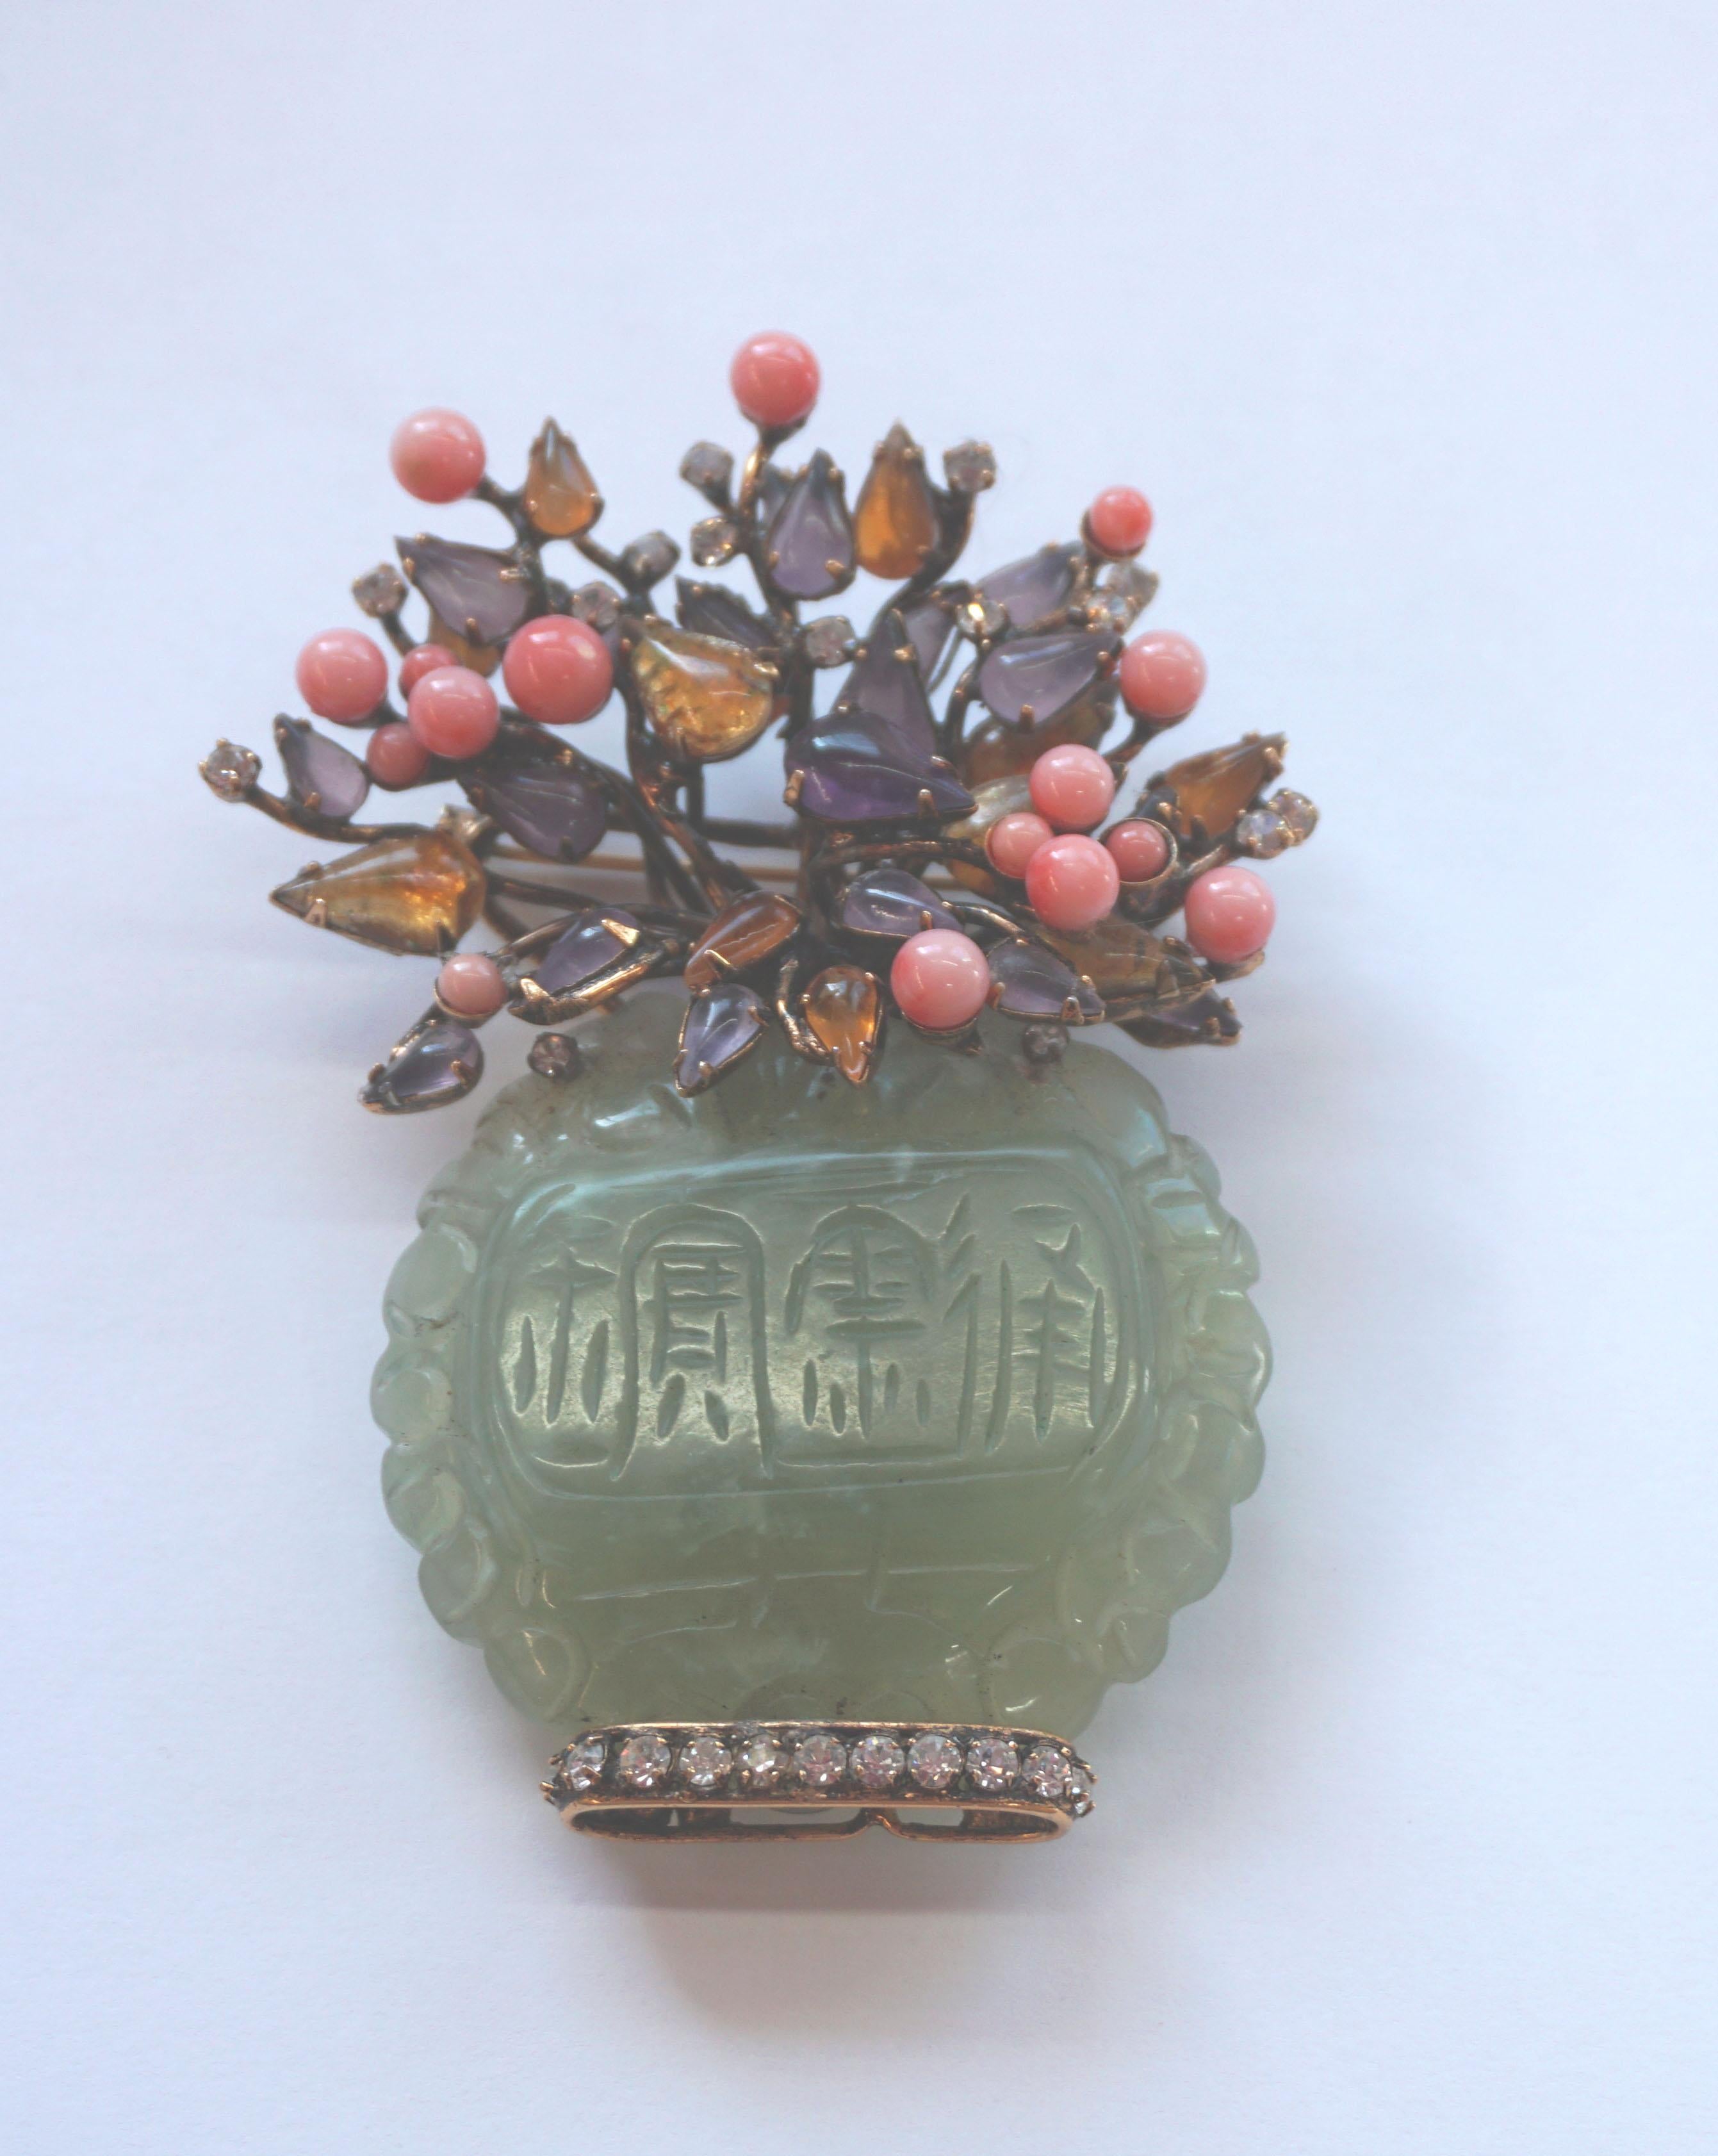 Stunning statement piece incorporating a superb array of carefully carved jade, amethyst, peach coral, amber and crystals and gold toned base metal. C. 2000. Signed on back. Size: 3.75